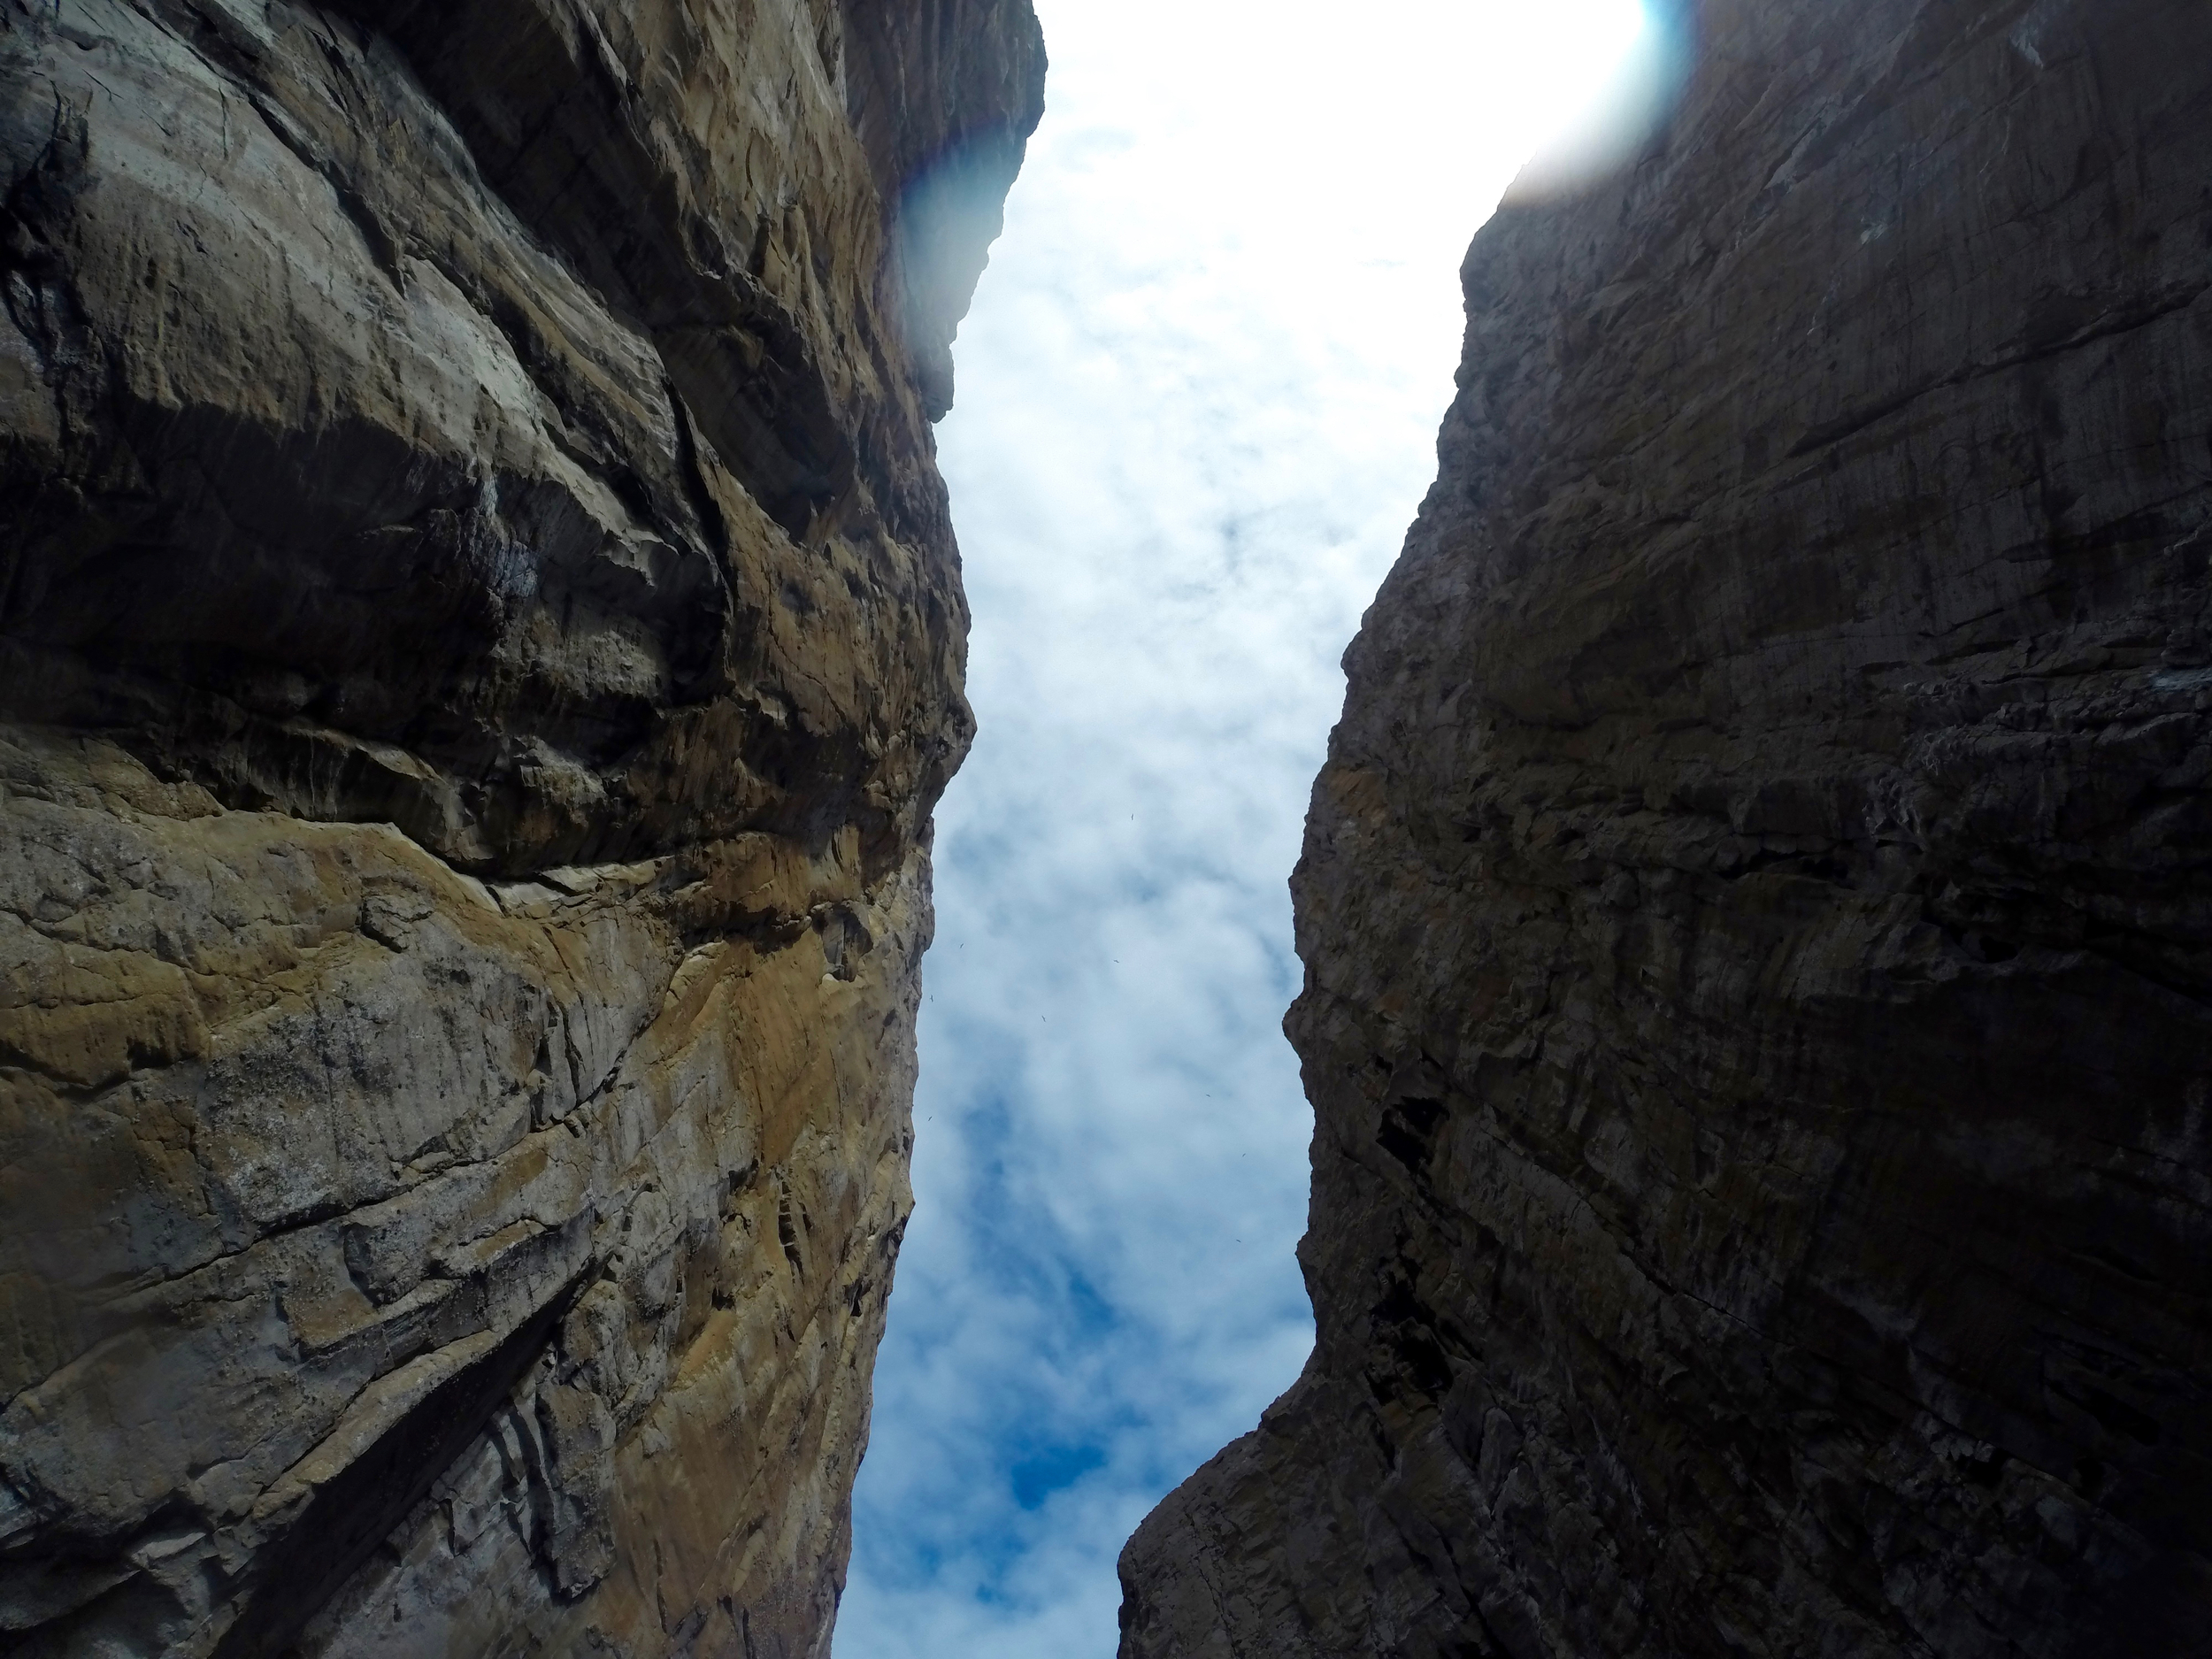  Looking up at the high cliffs of Kicker Rock 